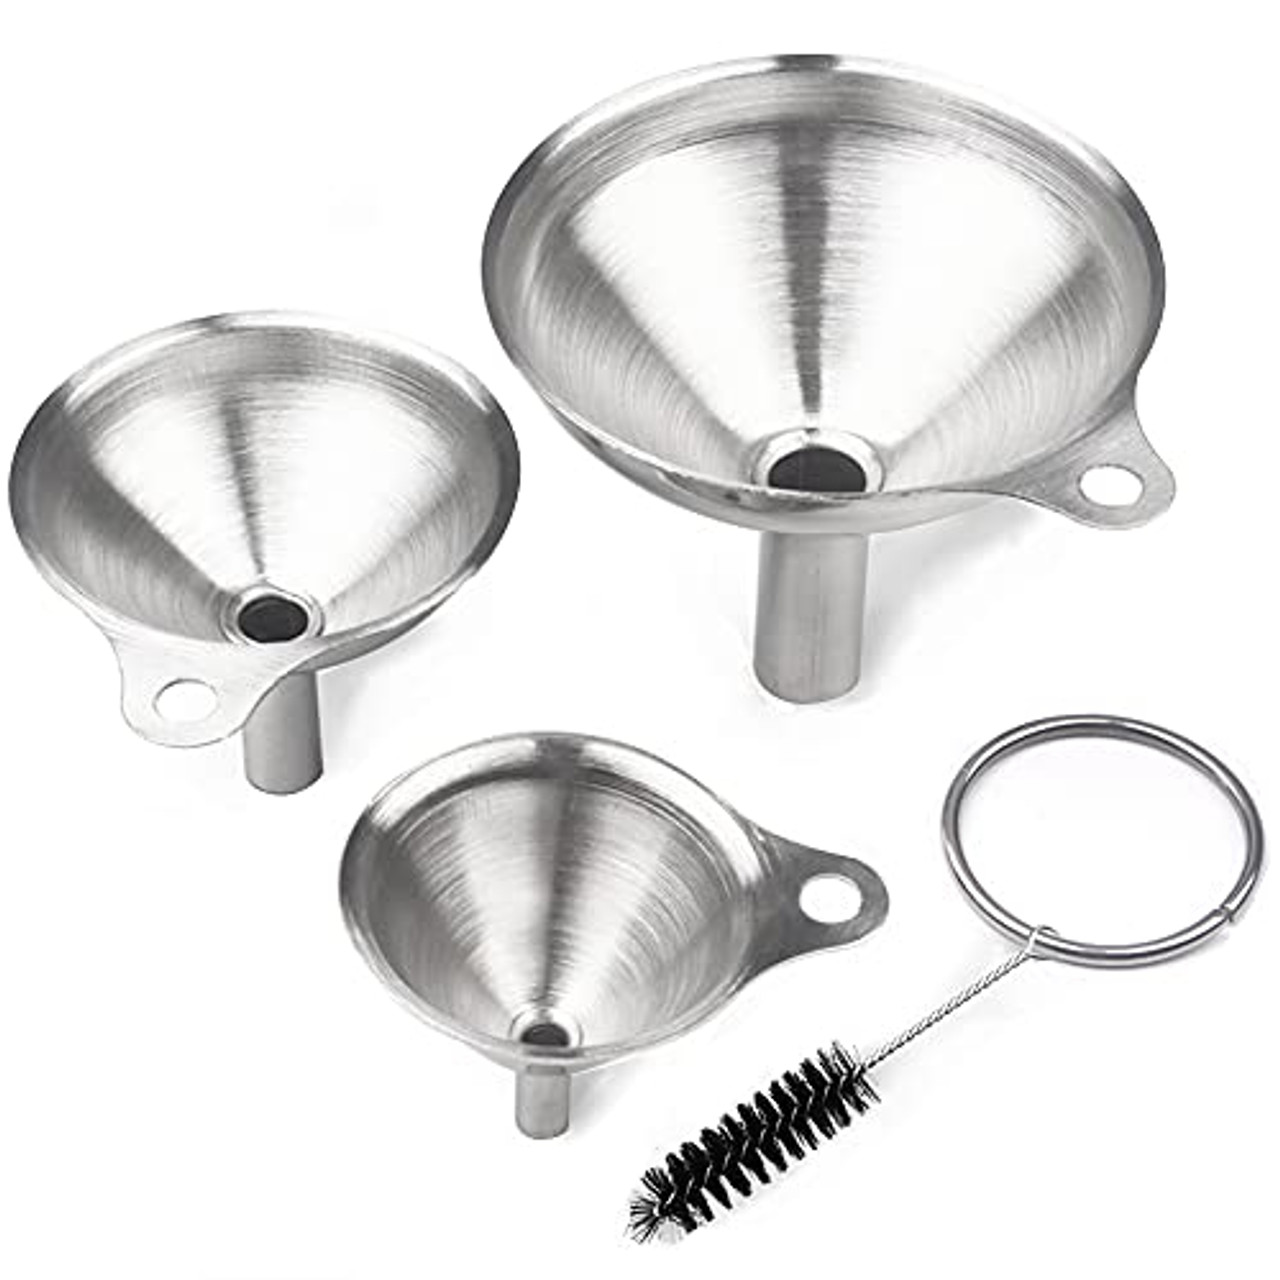 AIEVE Set of 3 Kitchen Funnels Small Funnel Stainless Steel Funnel with  Long Handle Funnels for Filling Bottles Liquid and Dry Ingredients,  Essential Oil, Spices, Powder, Flask, Silver price in Saudi Arabia